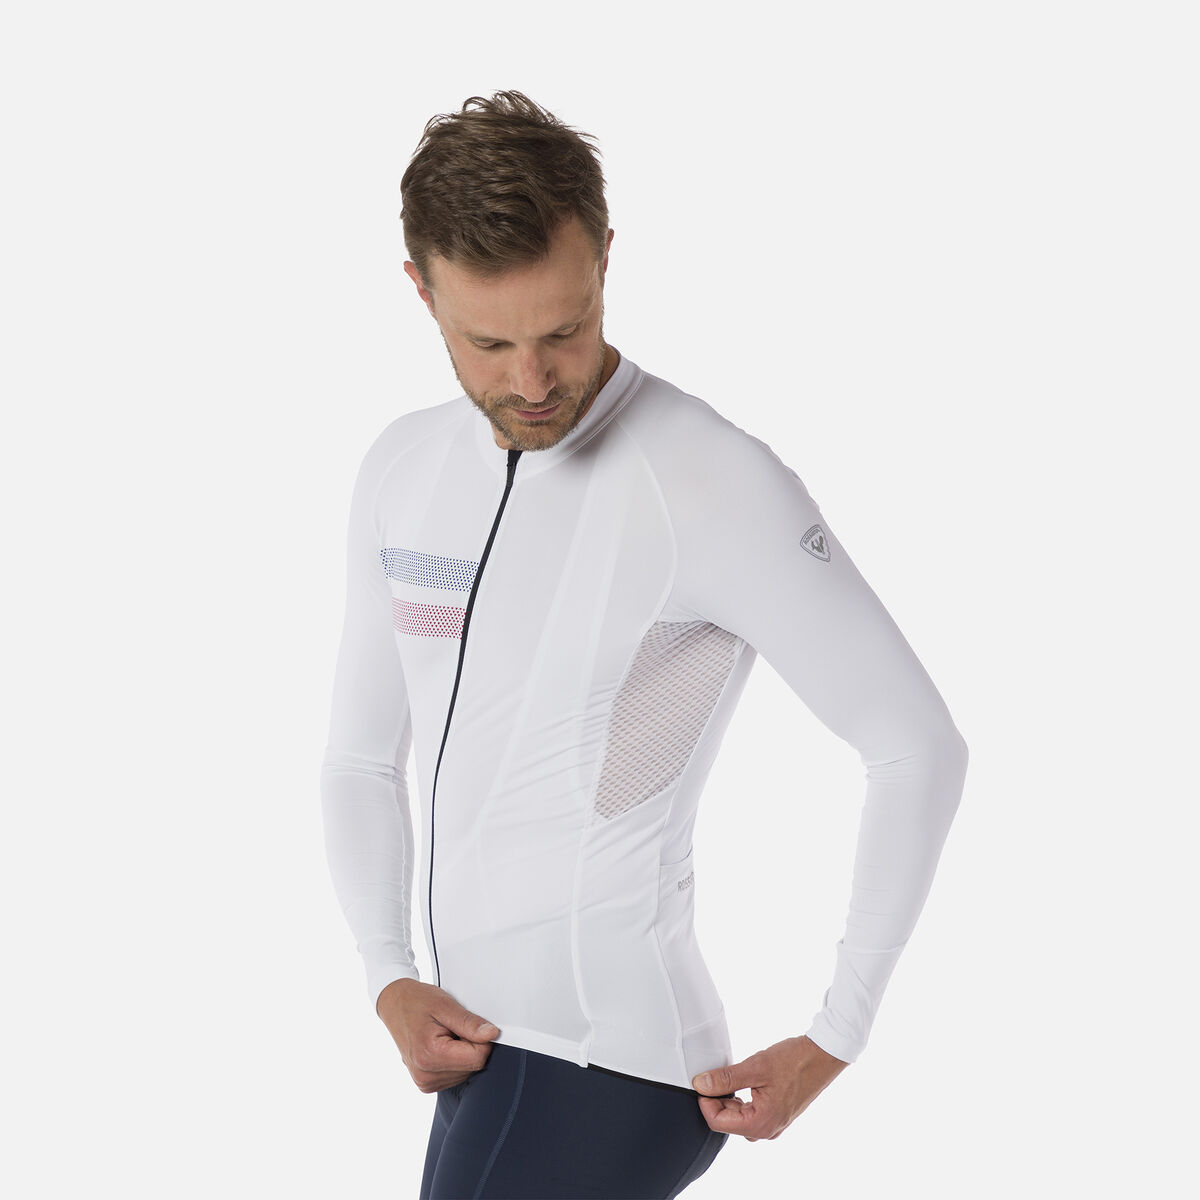 Rossignol Men's Cycling Jersey White